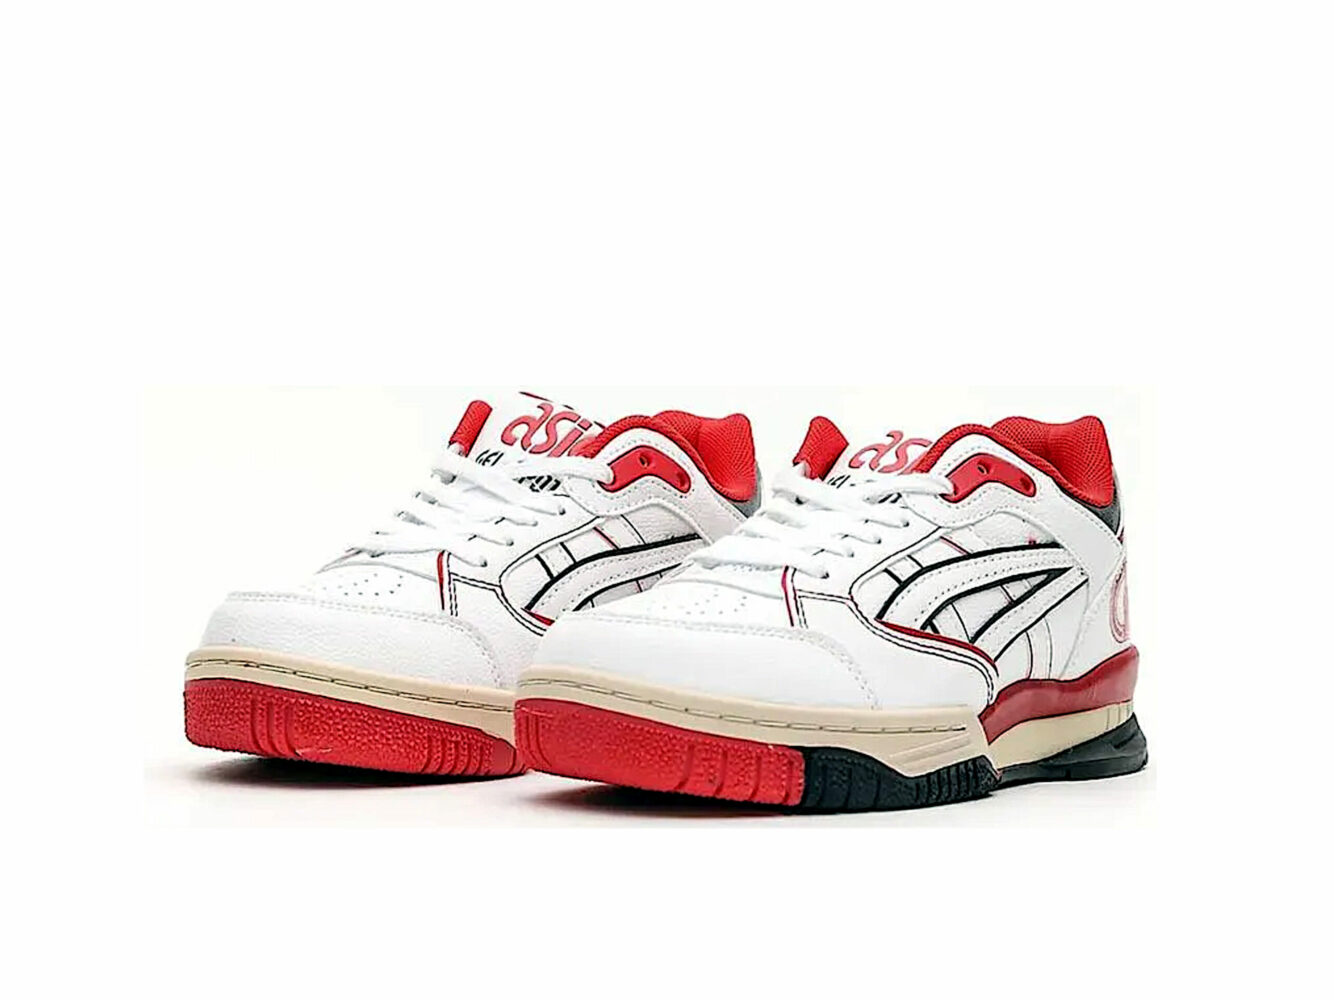 asics city poster chicago sportlyte low white red 1203A233-020 купить